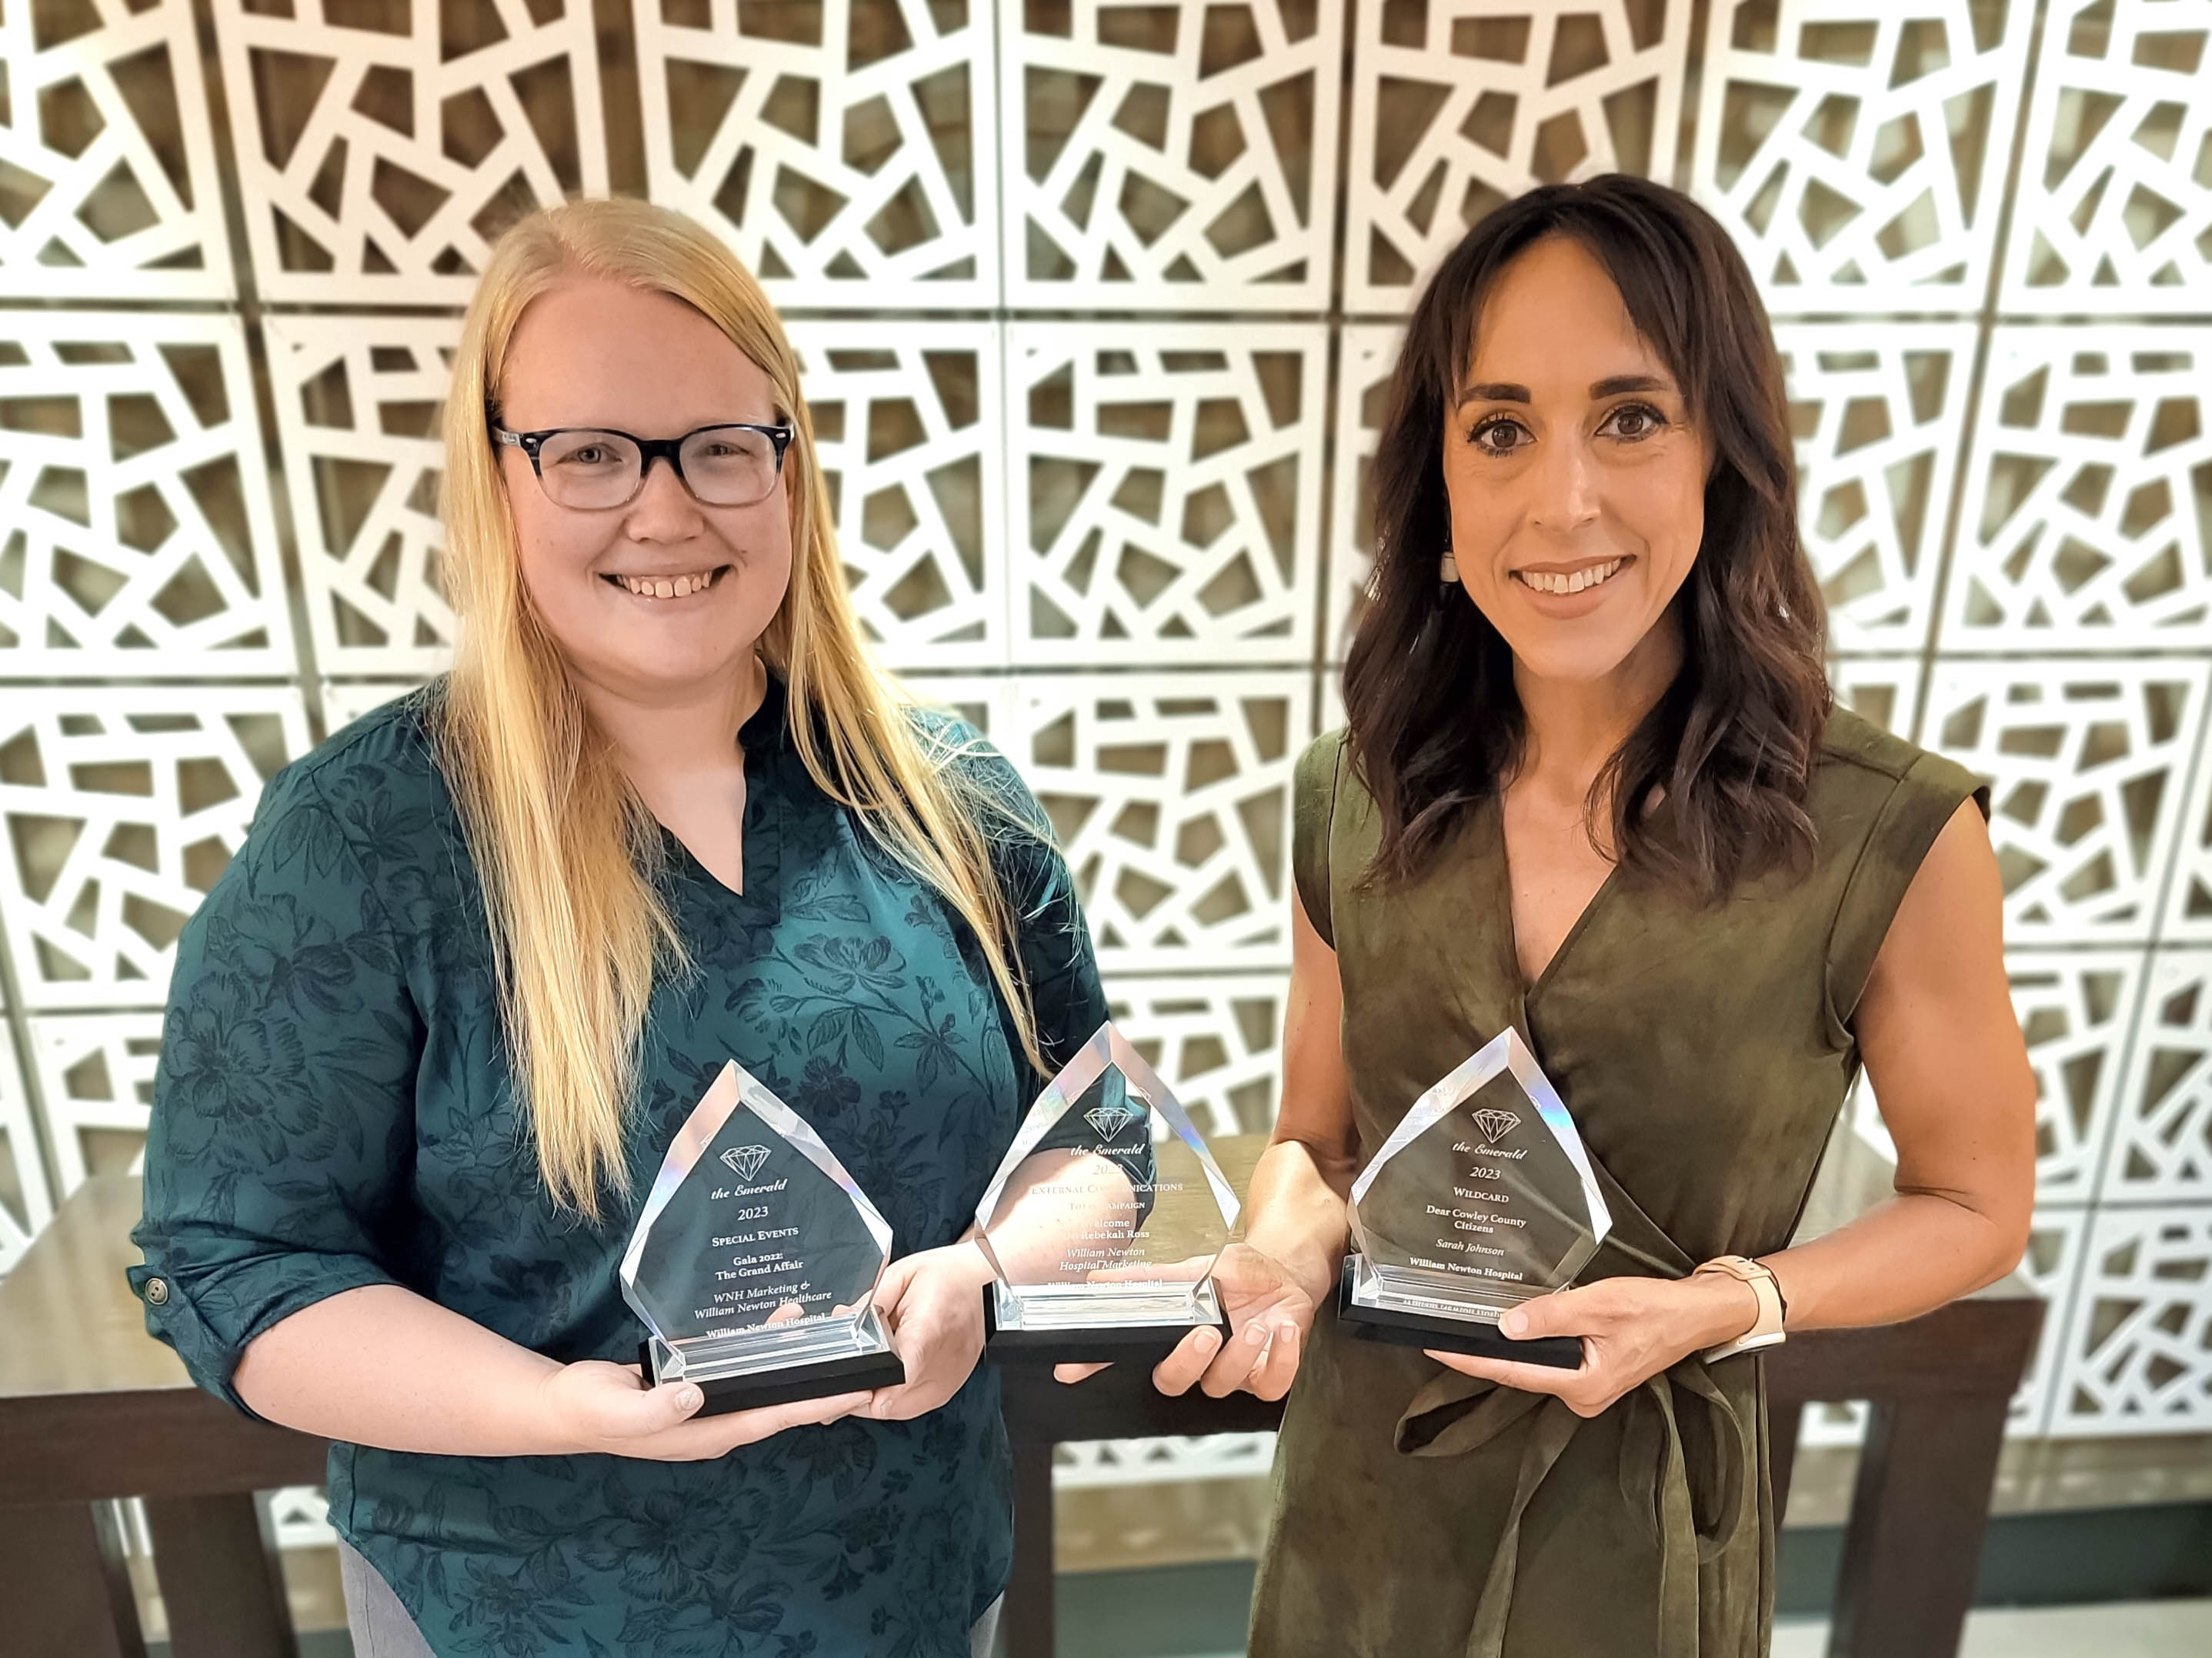 William Newton Hospital’s Kylie Stamper, left, and Sarah Johnson, right, display several awards earned for excellence in health care marketing and communications.